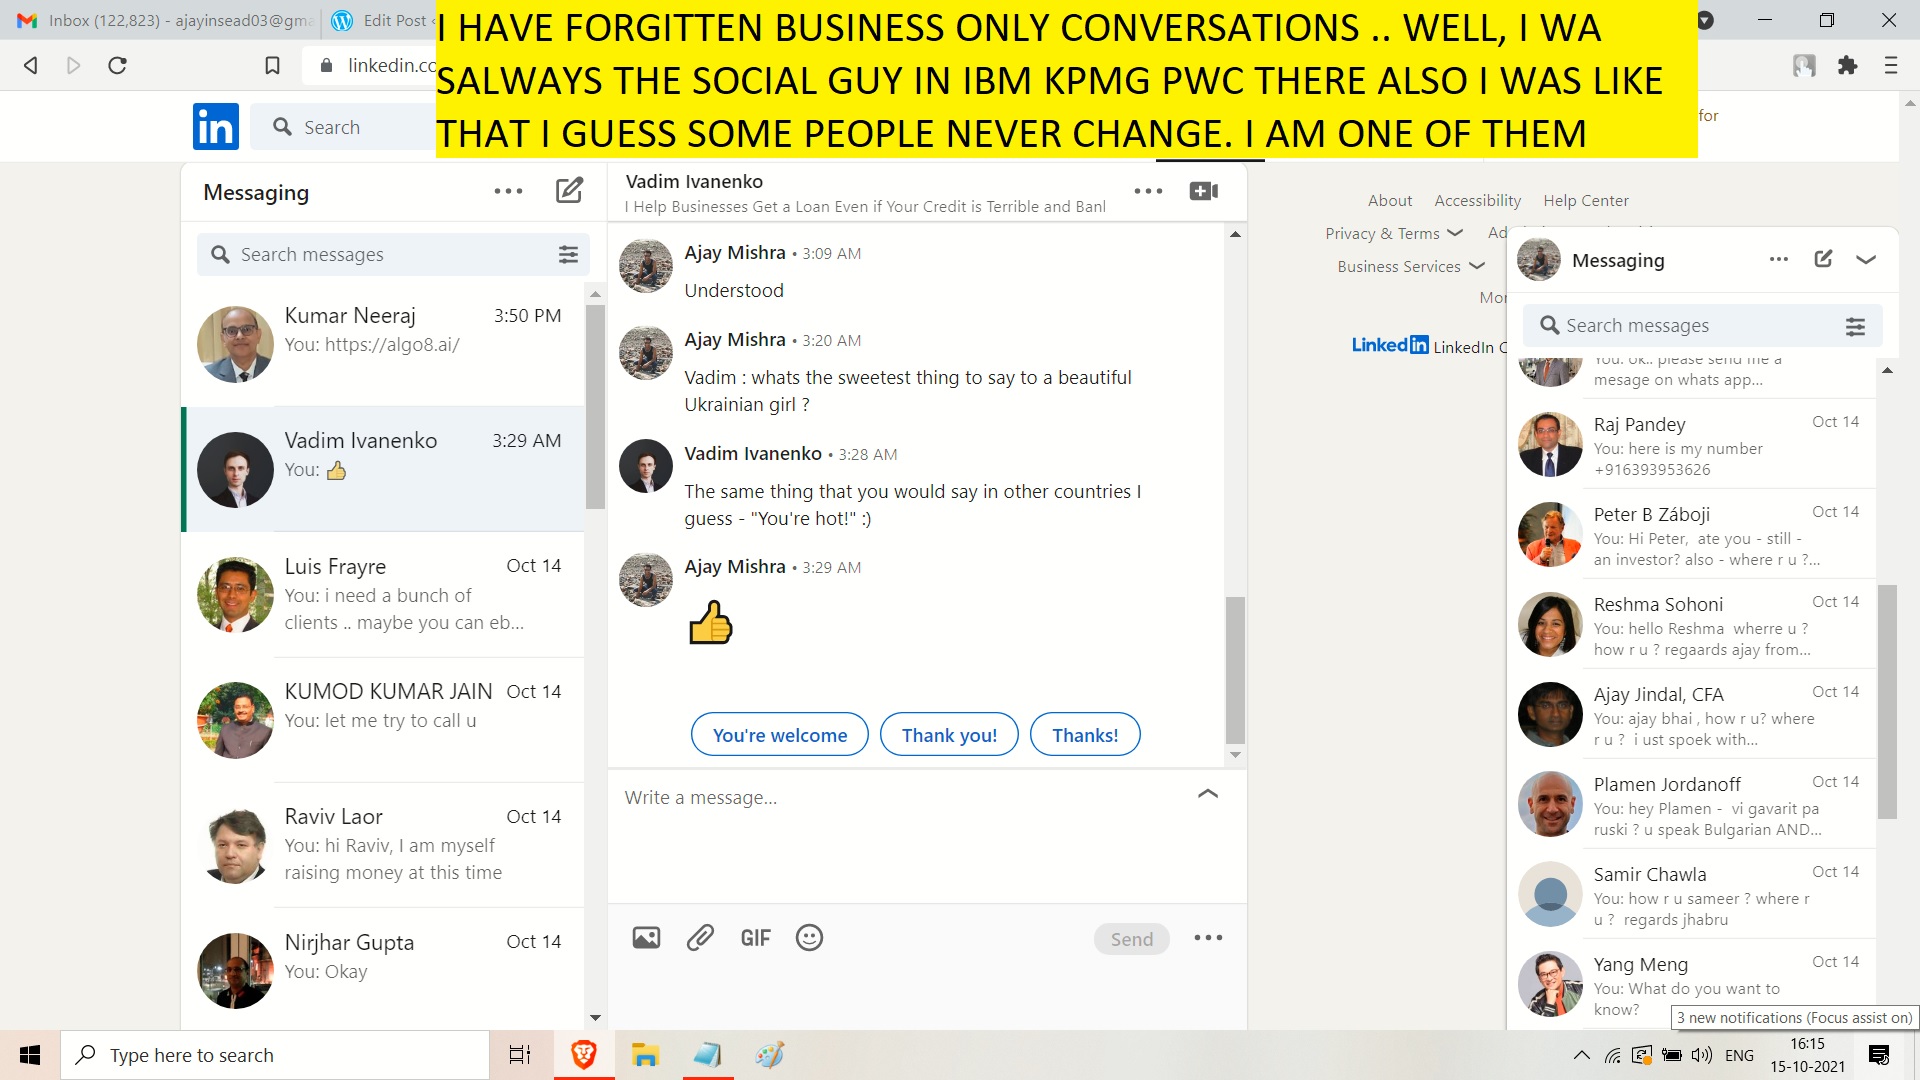 I HAVE FORGITTEN BUSINESS ONLY CONVERSATIONS .. WELL, I WA SALWAYS THE SOCIAL GUY IN IBM KPMG PWC THERE ALSO I WAS LIKE THAT I GUESS SOME PEOPLE NEVER CHANGE. I AM ONE OF THEM